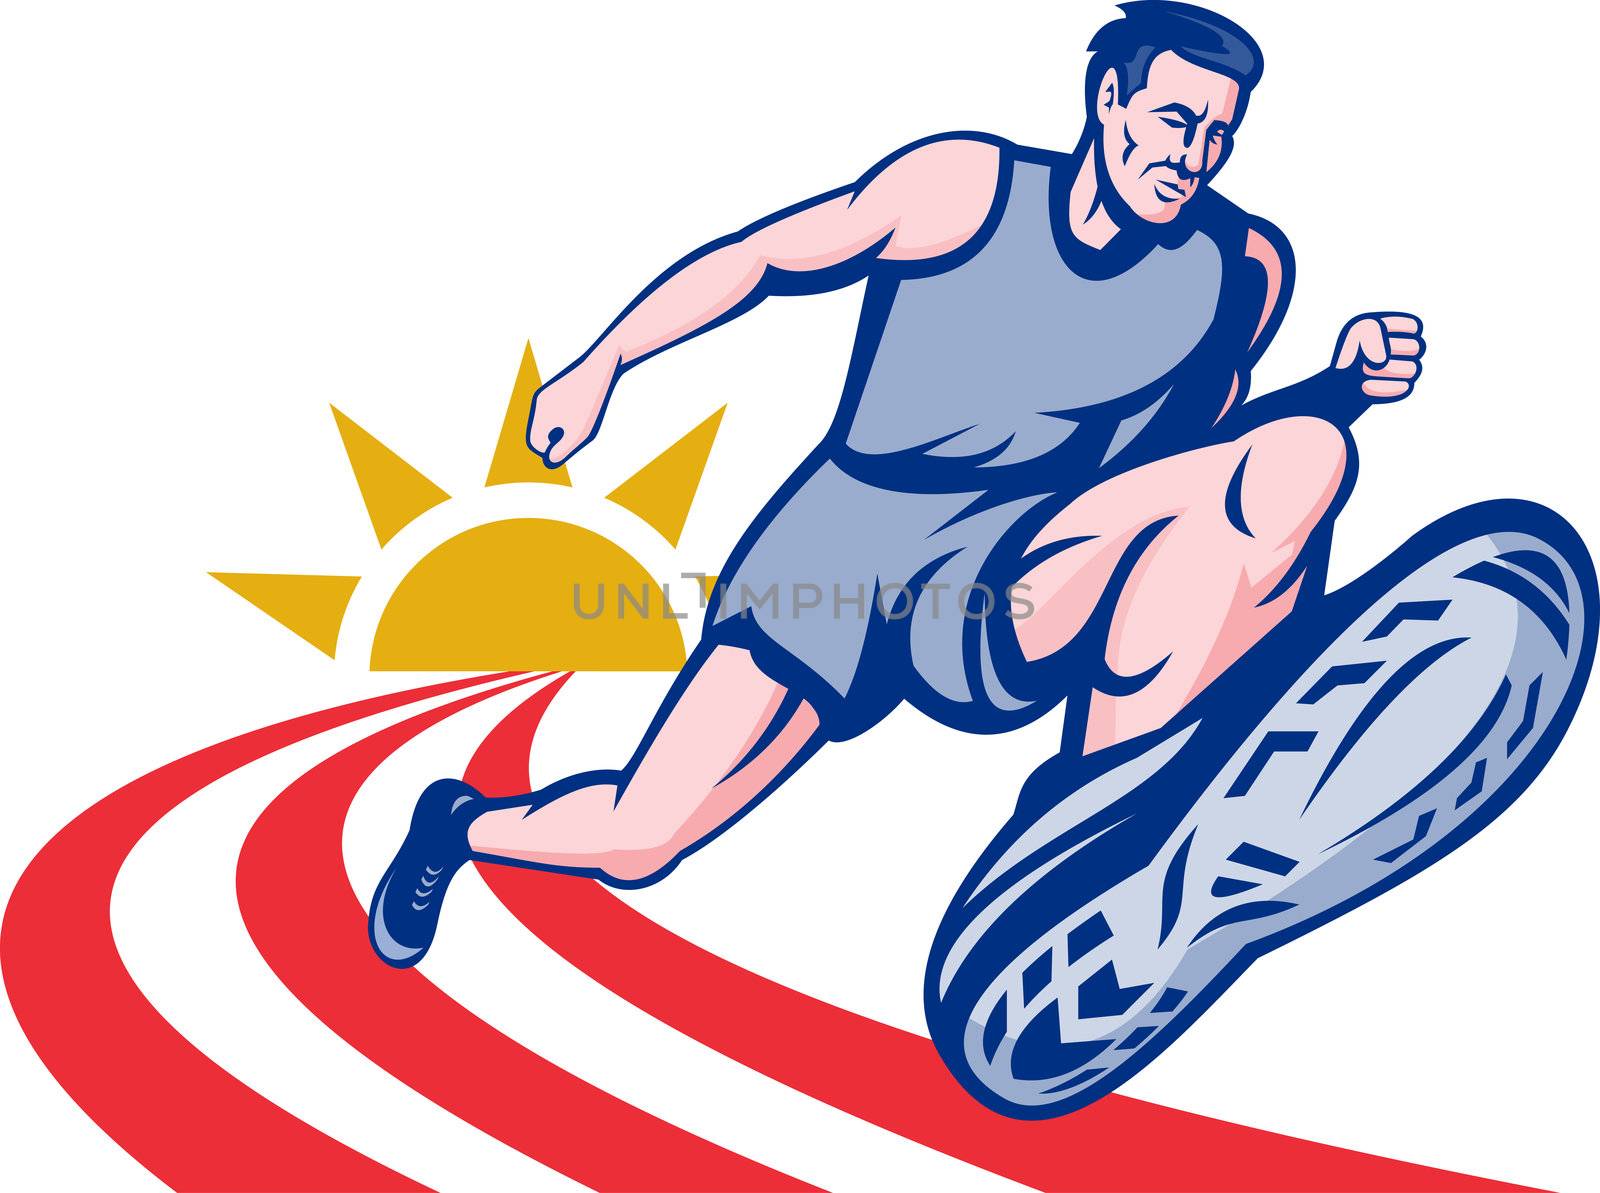 illustration Marathon runner on track with sunburst viewed from an extremely low angle.